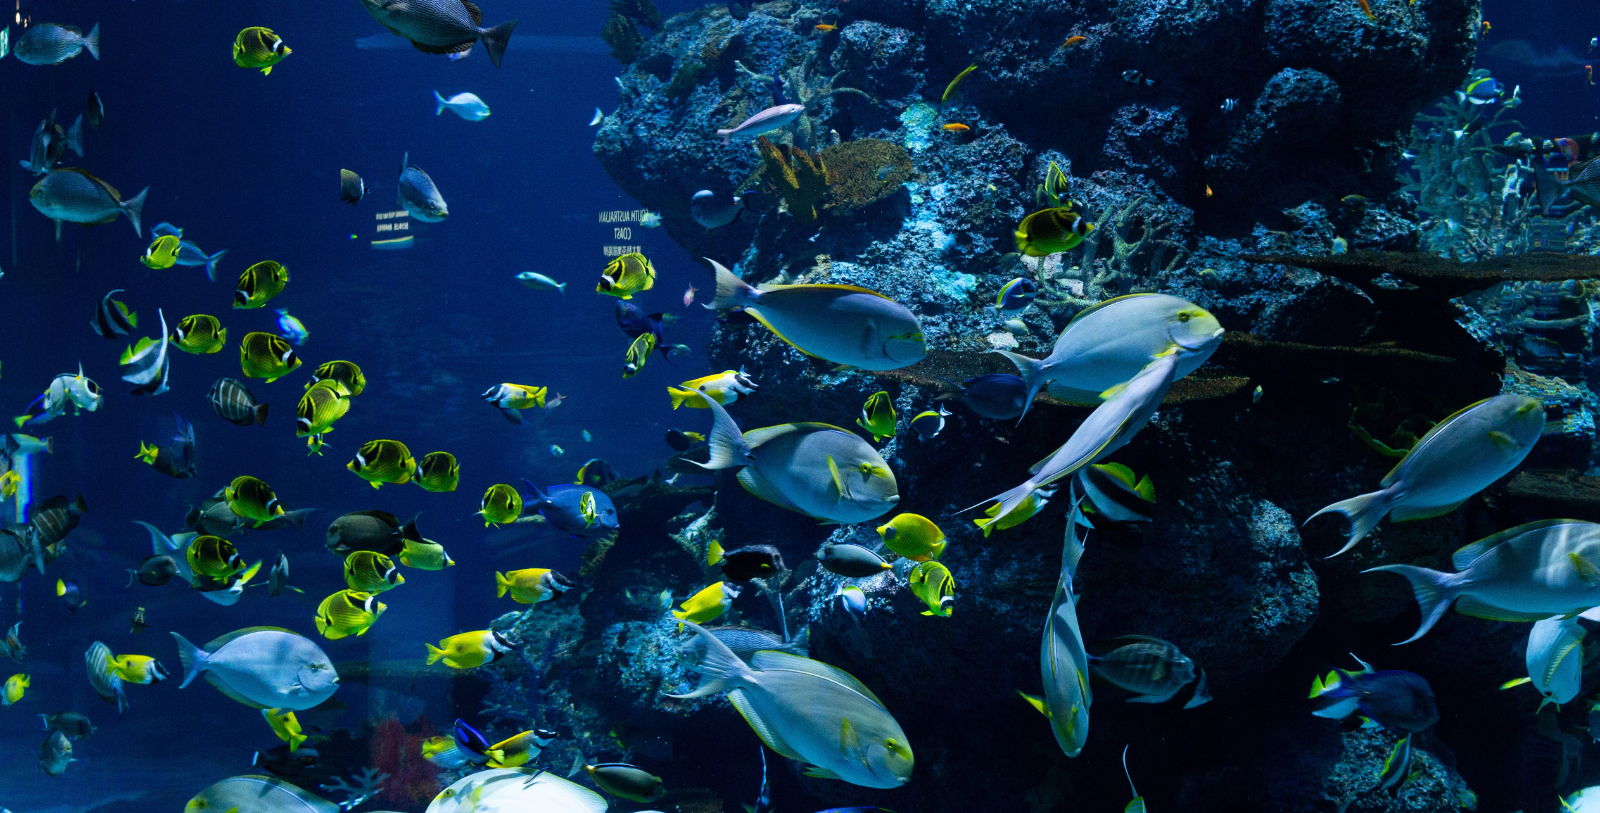 Visit the St. Louis Aquarium and see blue lobsters and stingrays.  